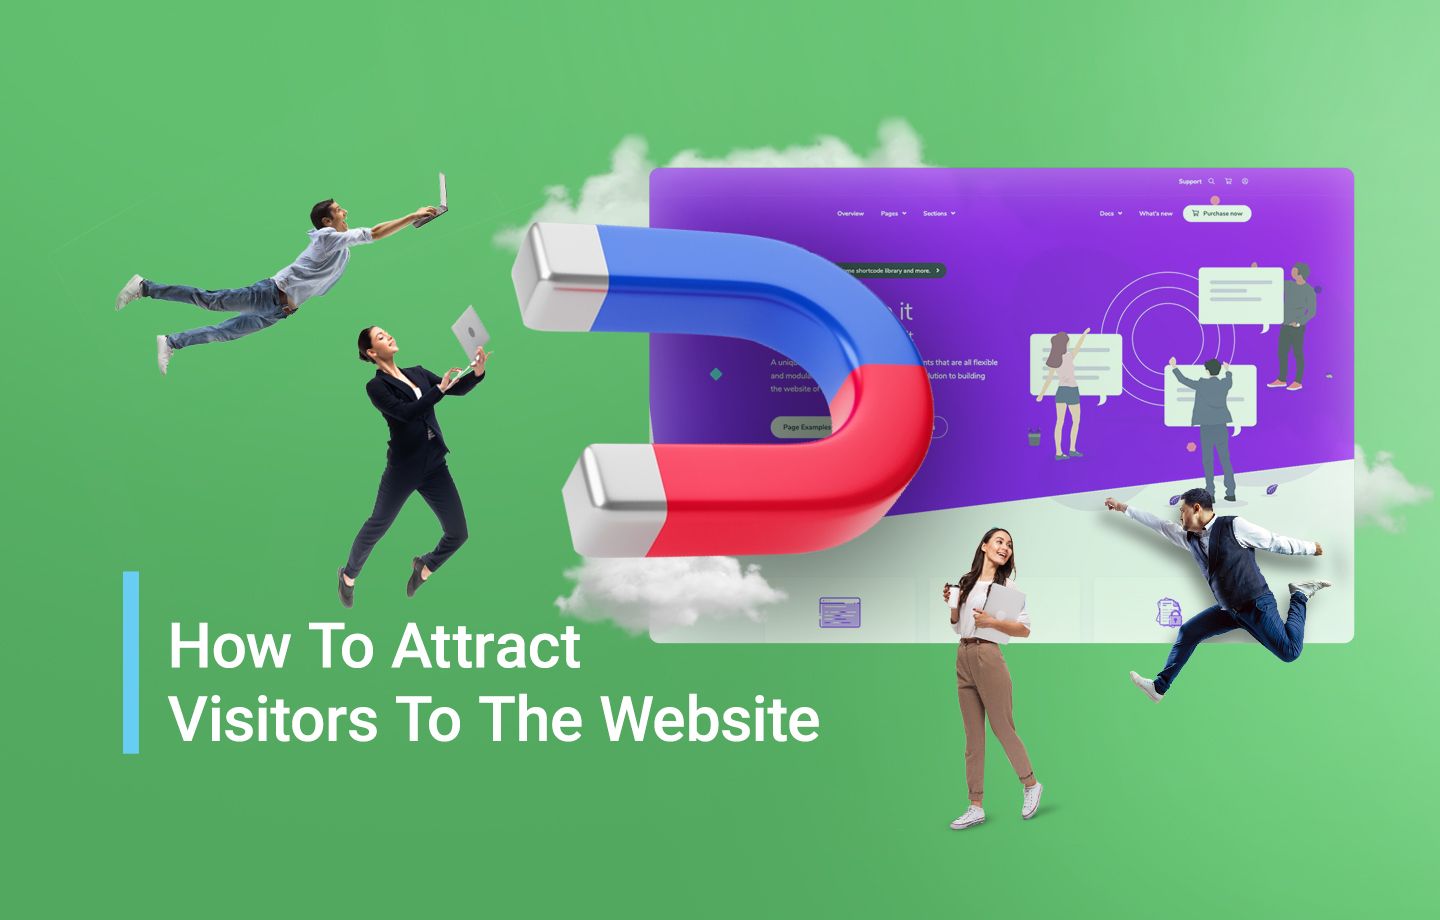 How To Attract Visitors To The Website?